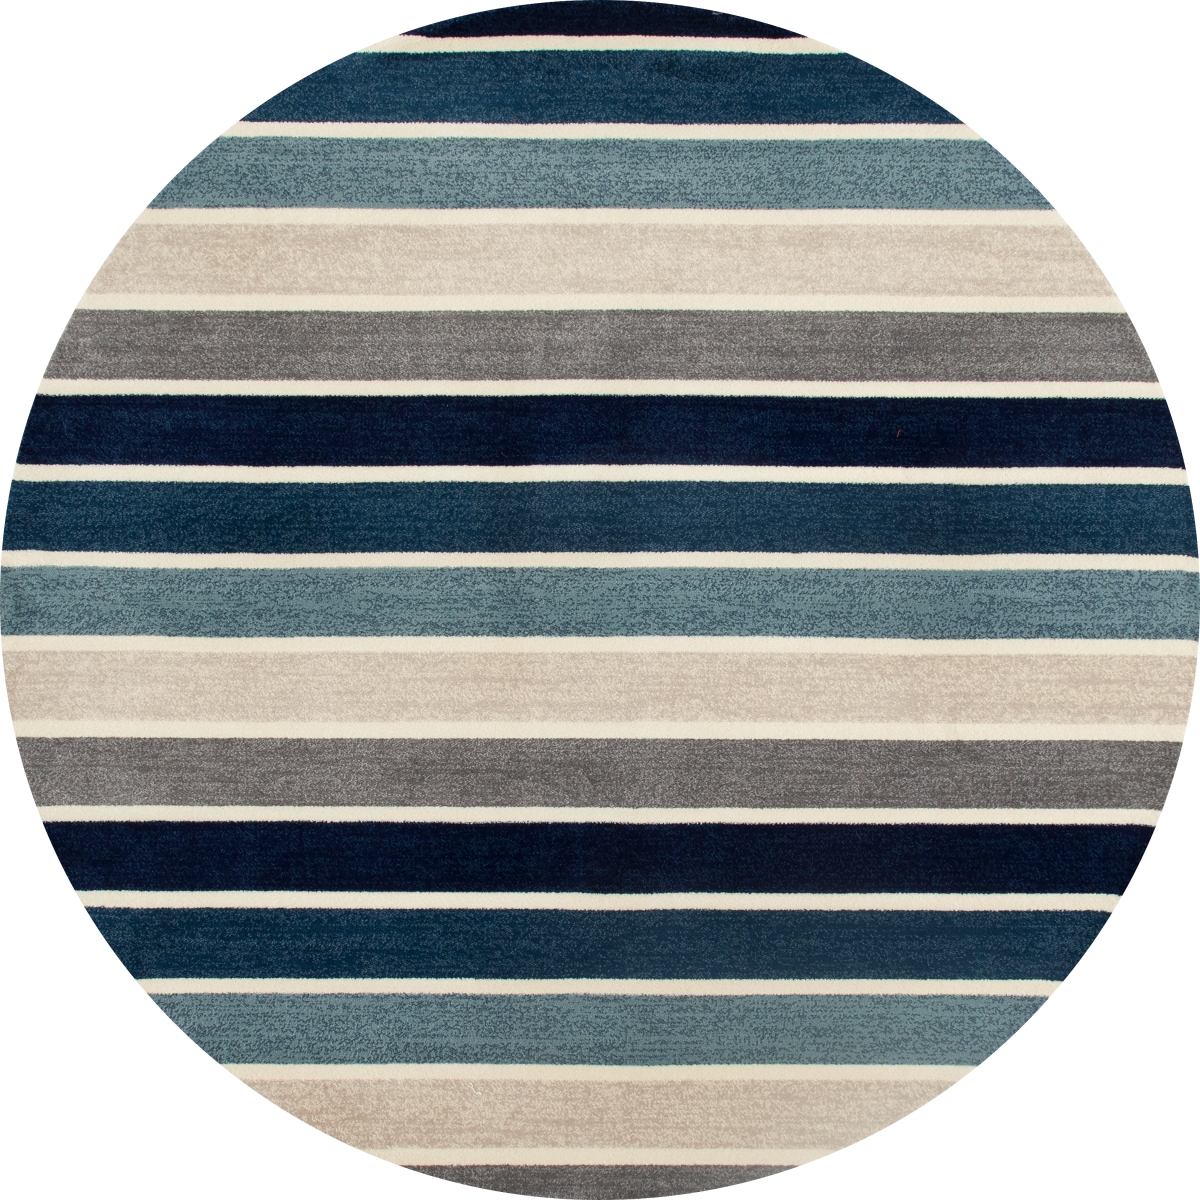 25627 5 Ft. Troy Collection Mainline Woven Round Area Rug, Blue